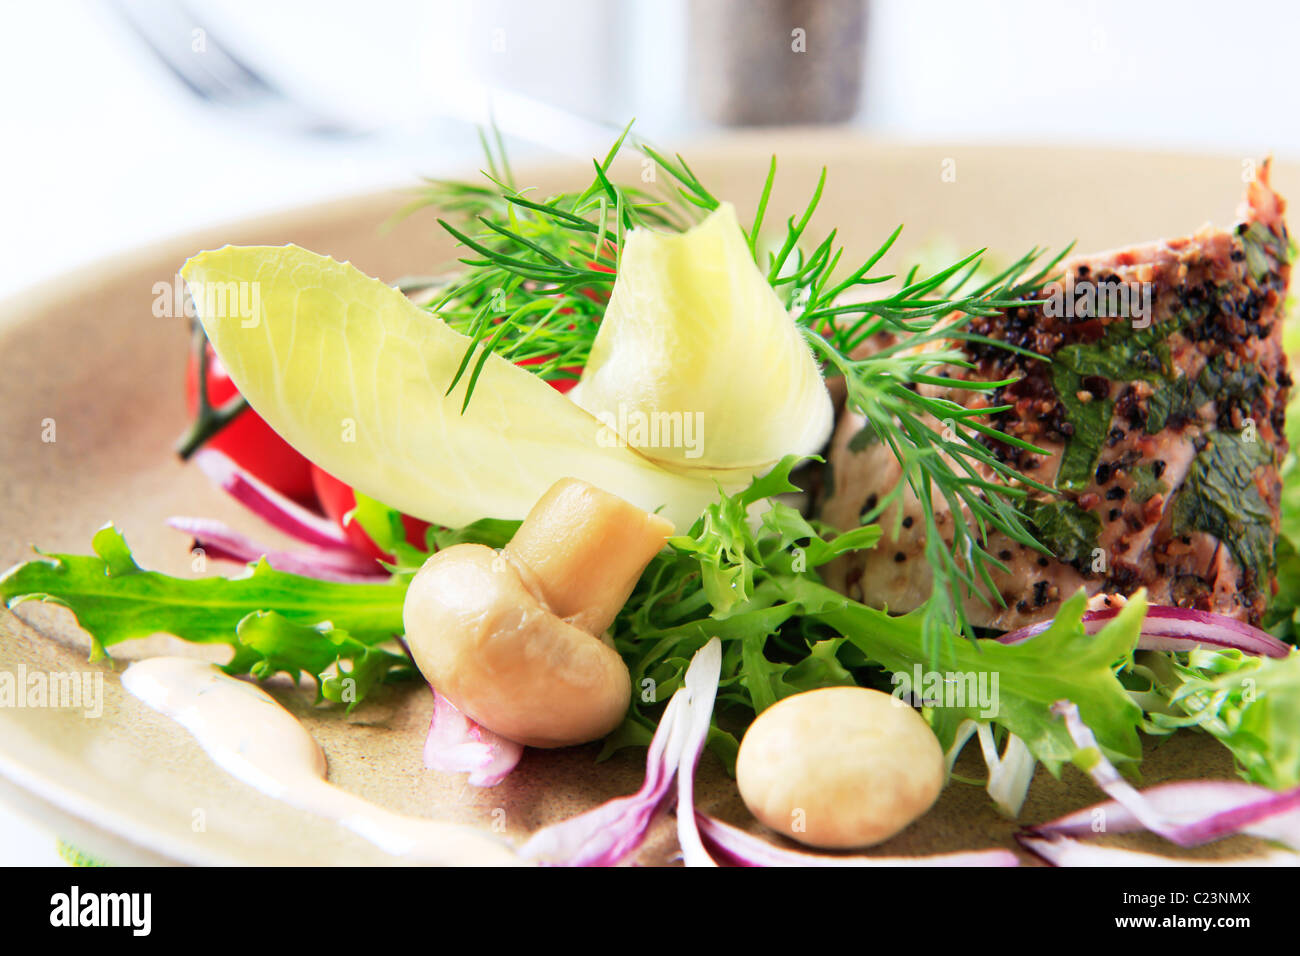 Pickled mushrooms and fresh salad - detail Stock Photo